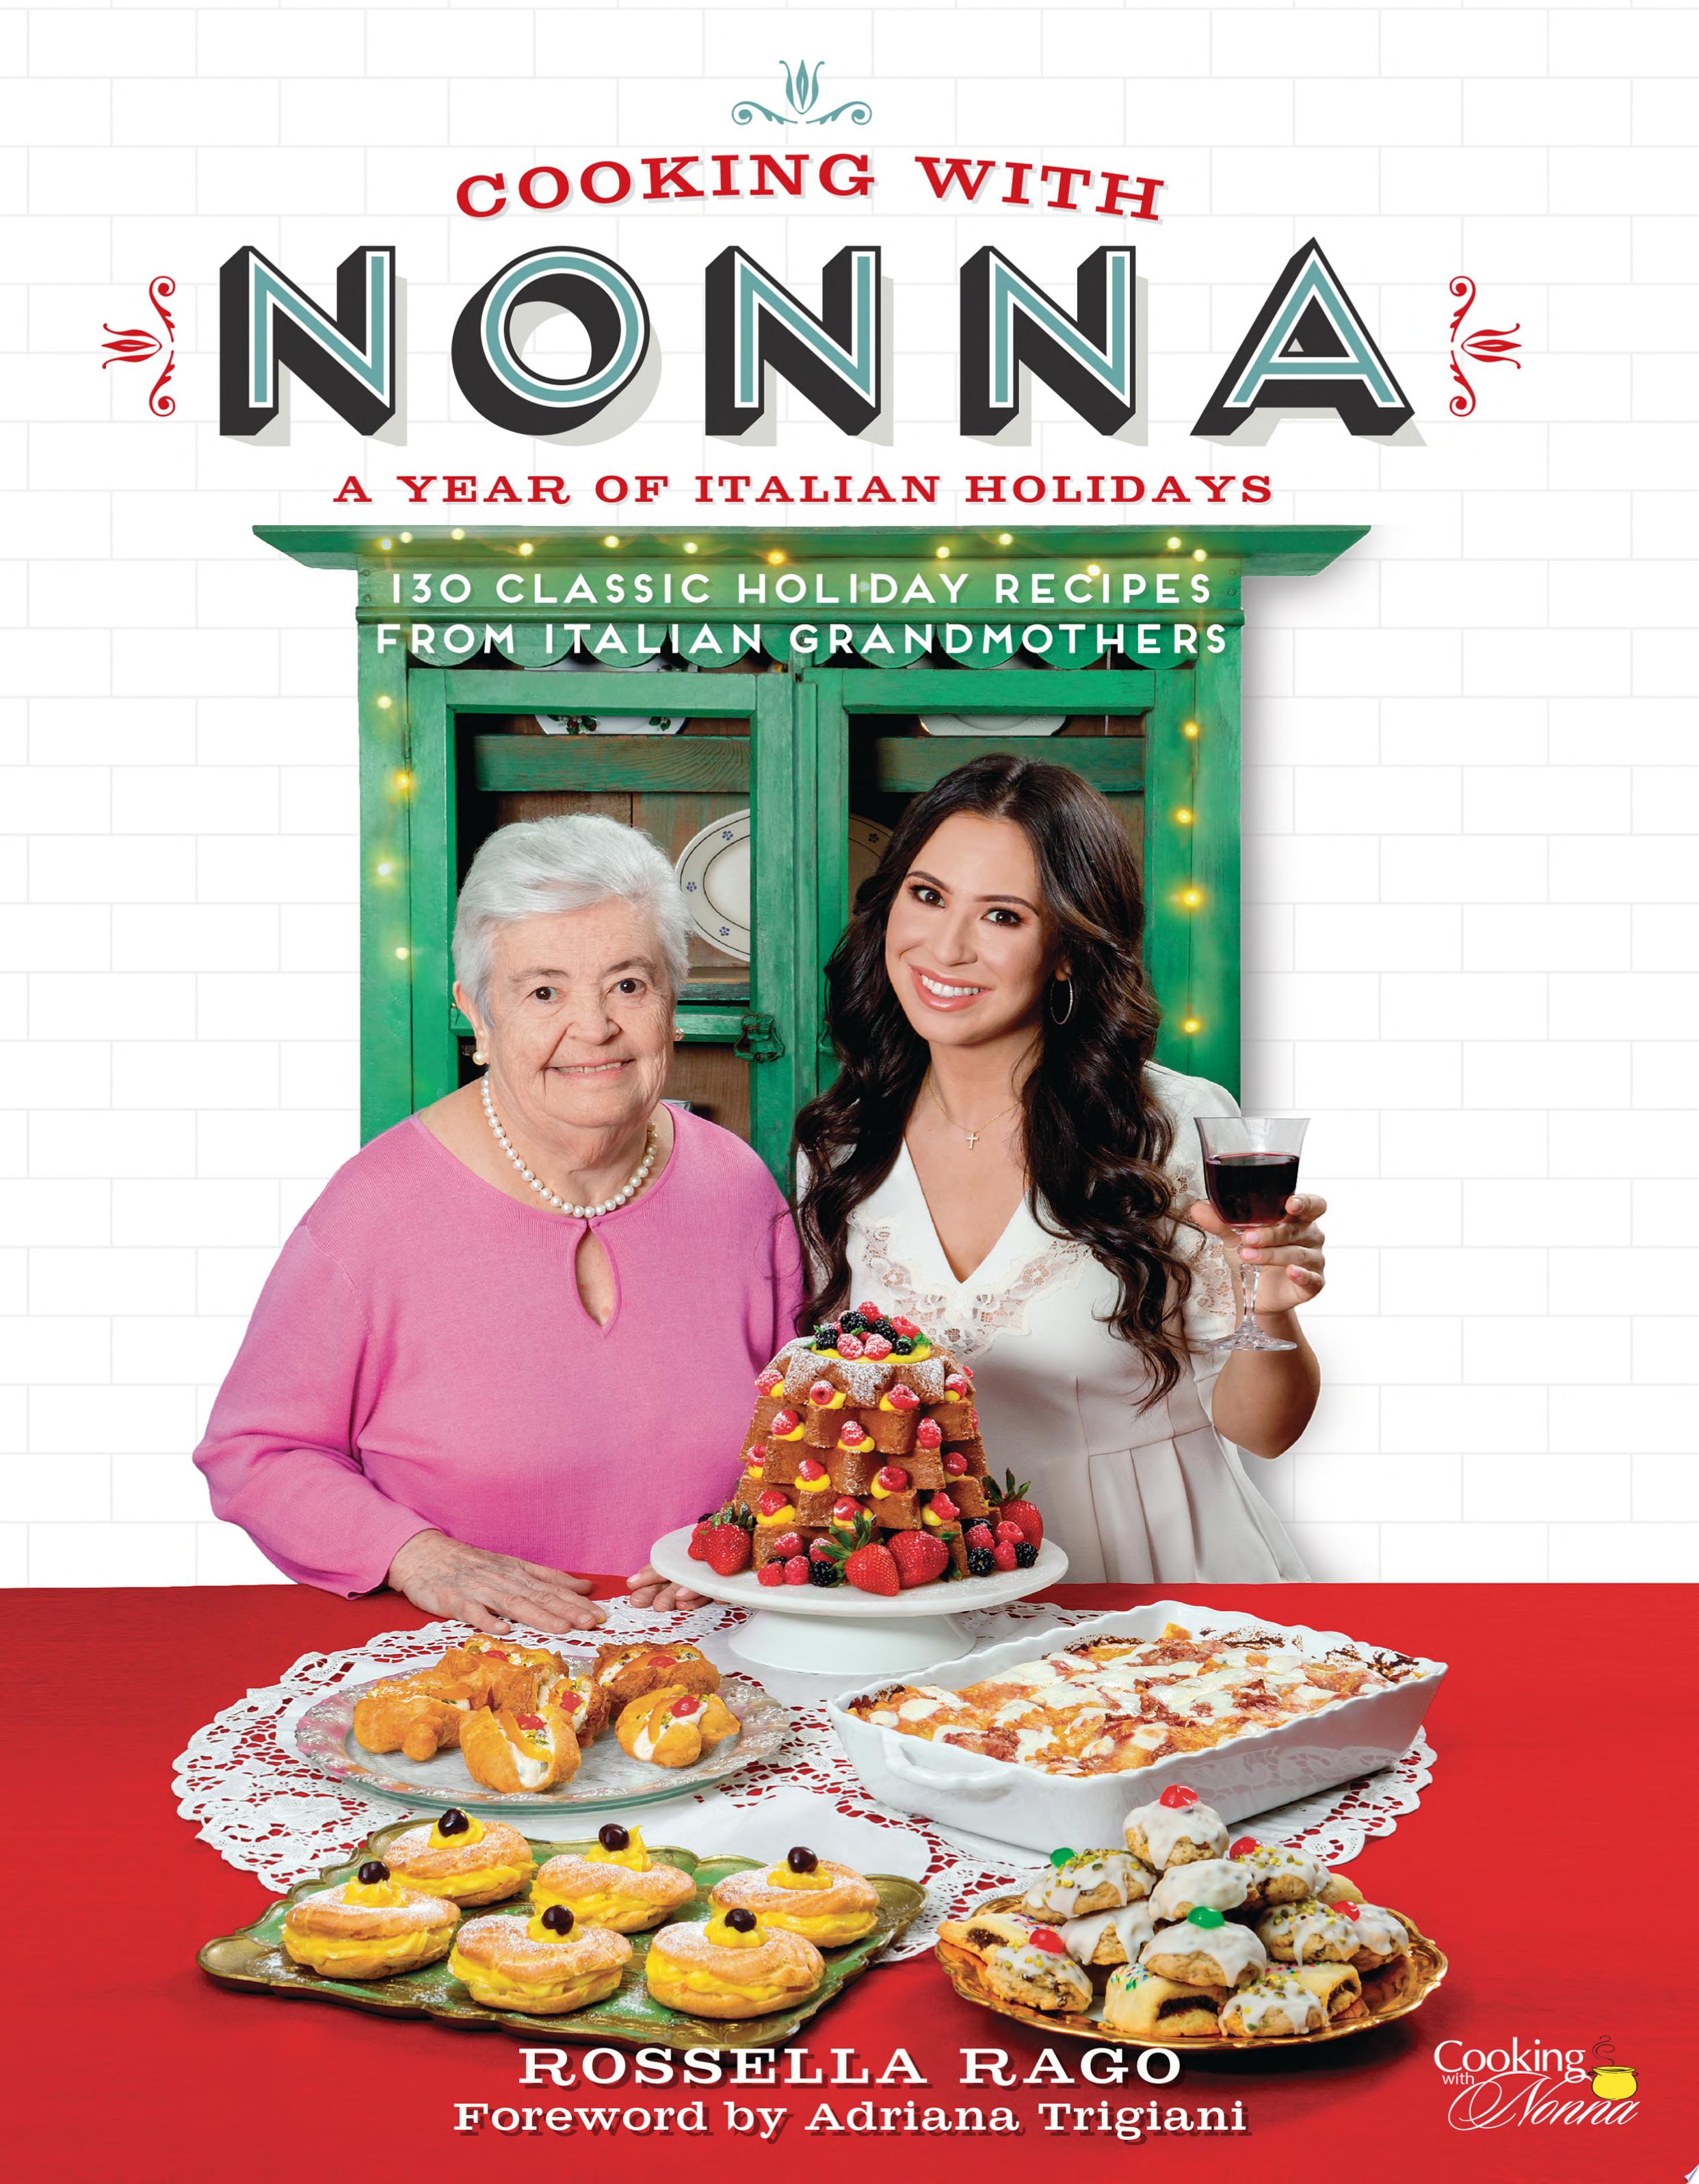 Image for "Cooking with Nonna: A Year of Italian Holidays"